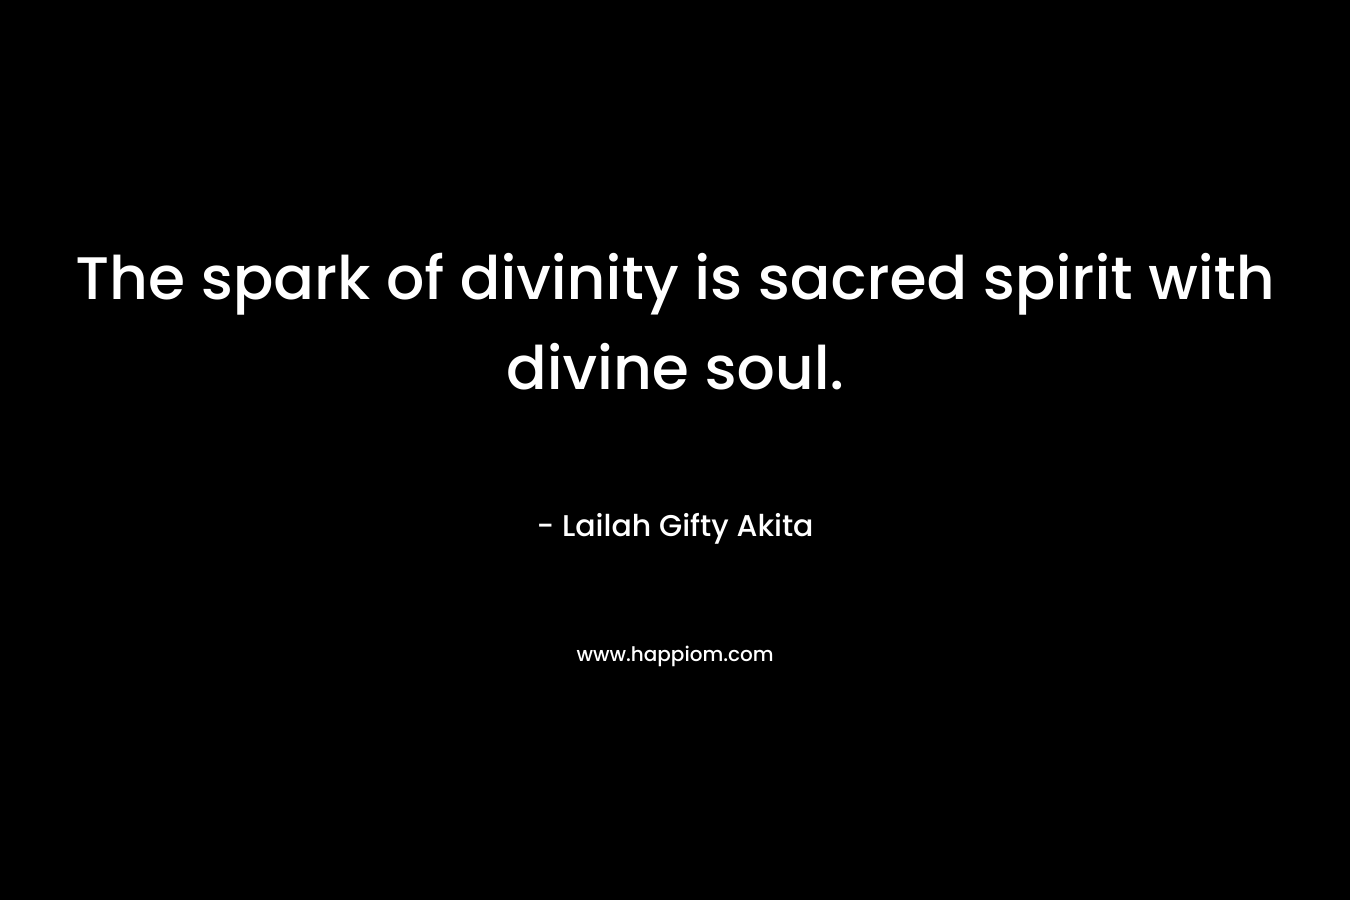 The spark of divinity is sacred spirit with divine soul.